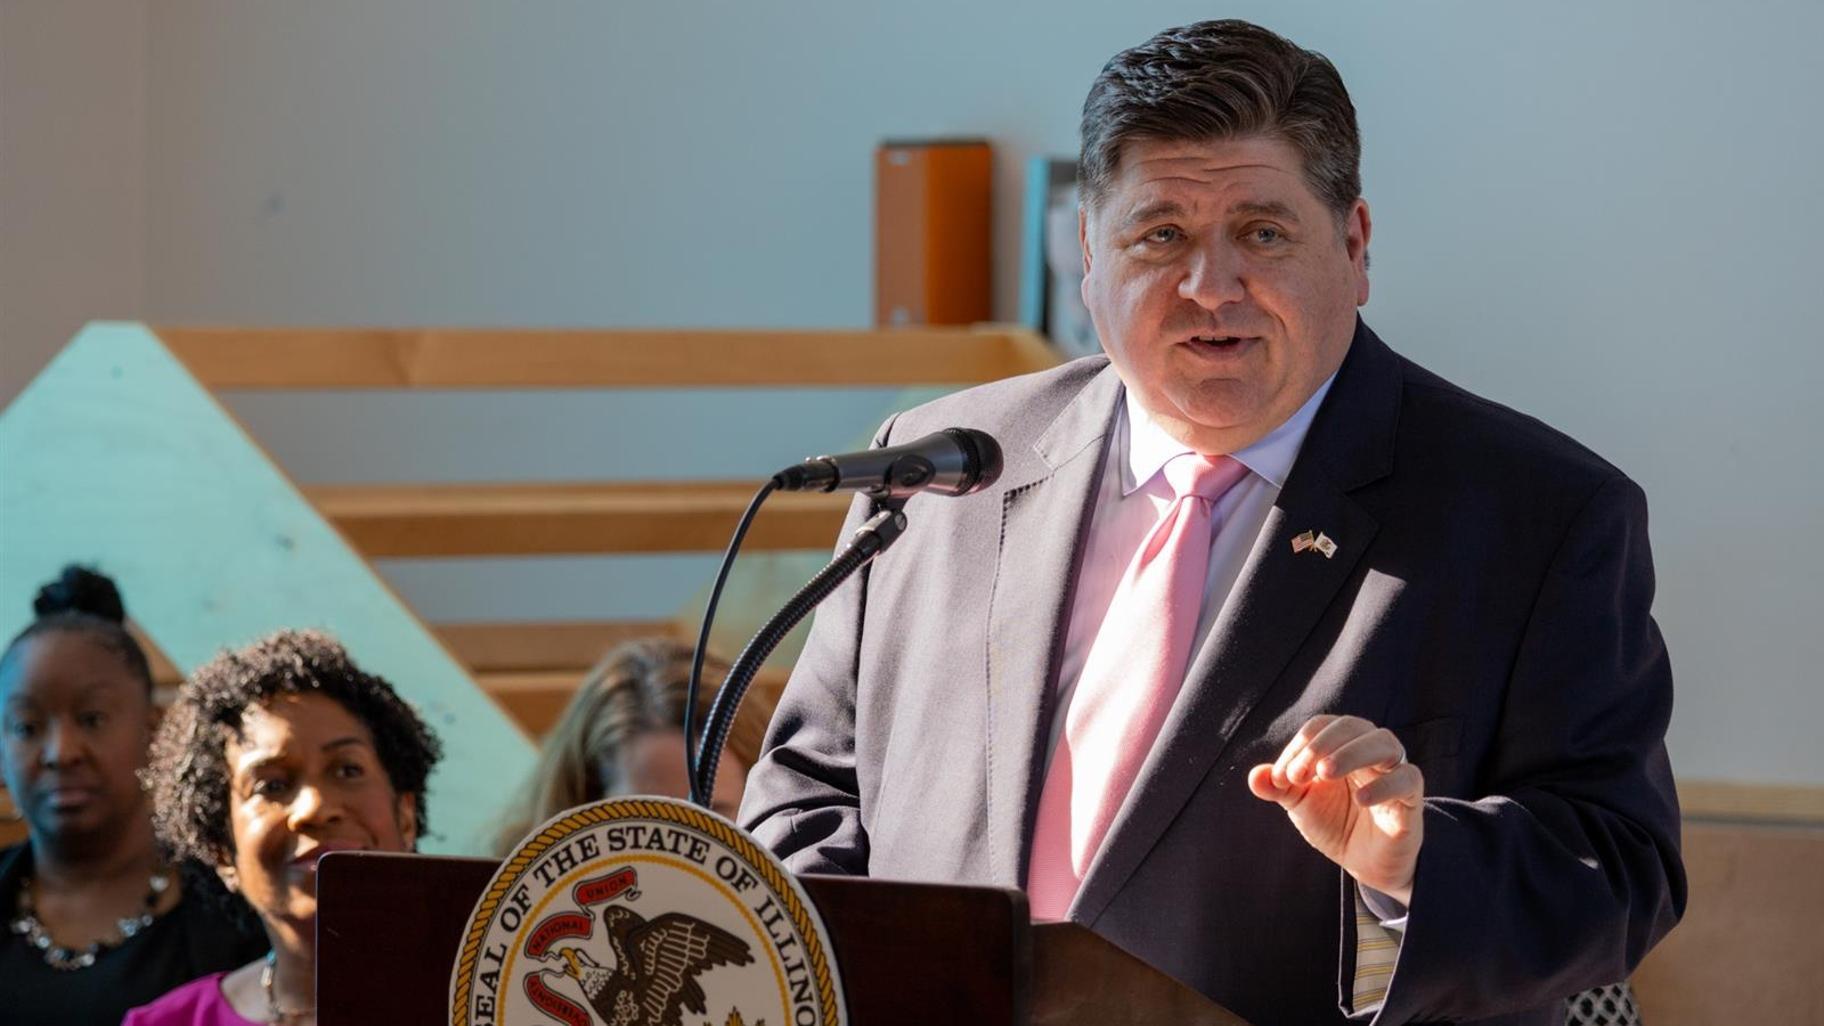 Gov. J.B. Pritzker Announces Plan to Spend Additional $160M to Care for Migrants as Winter Looms